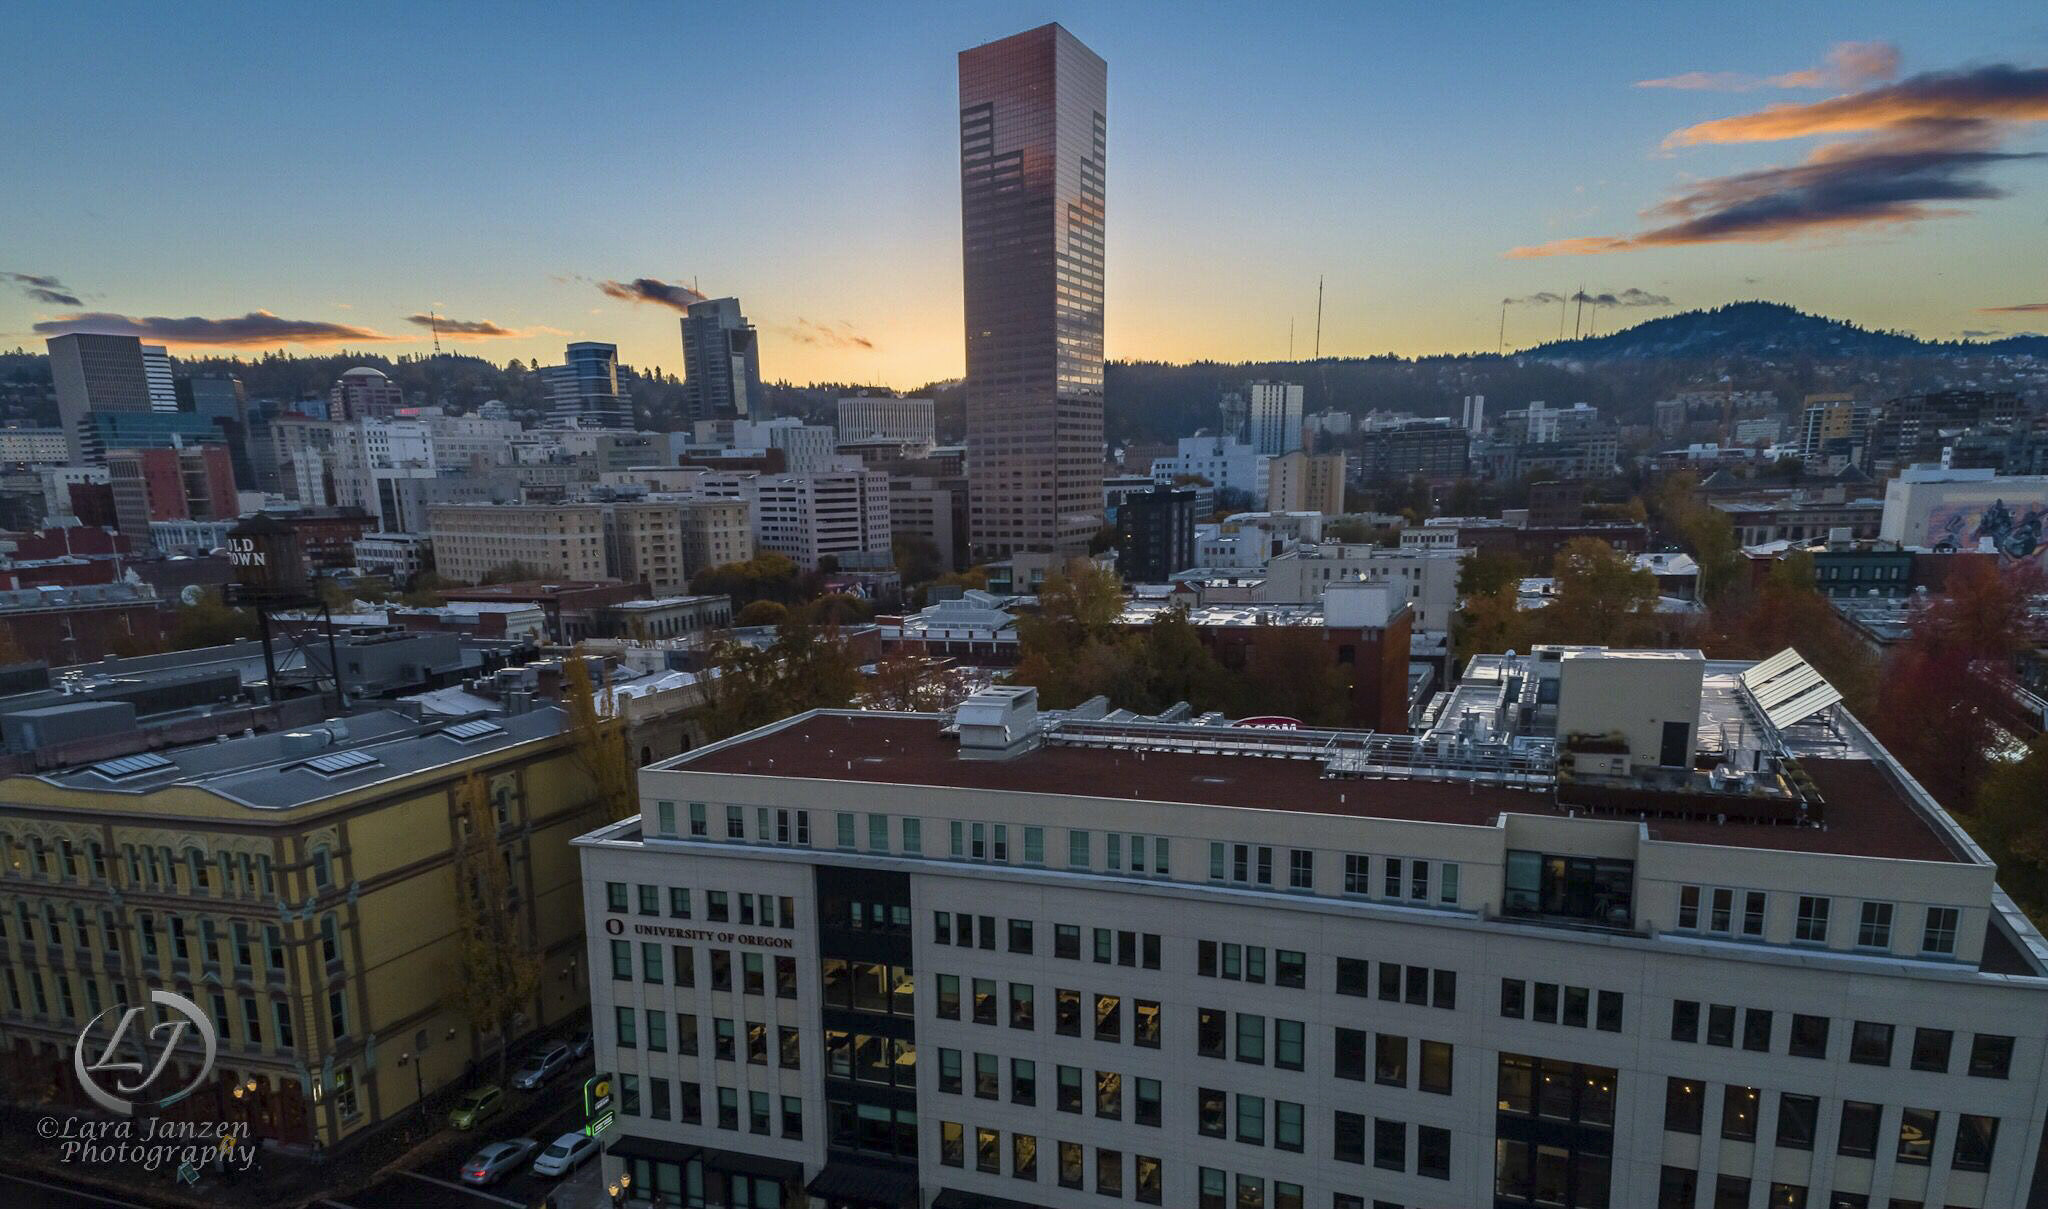 Another view of downtown Portland with a Drone